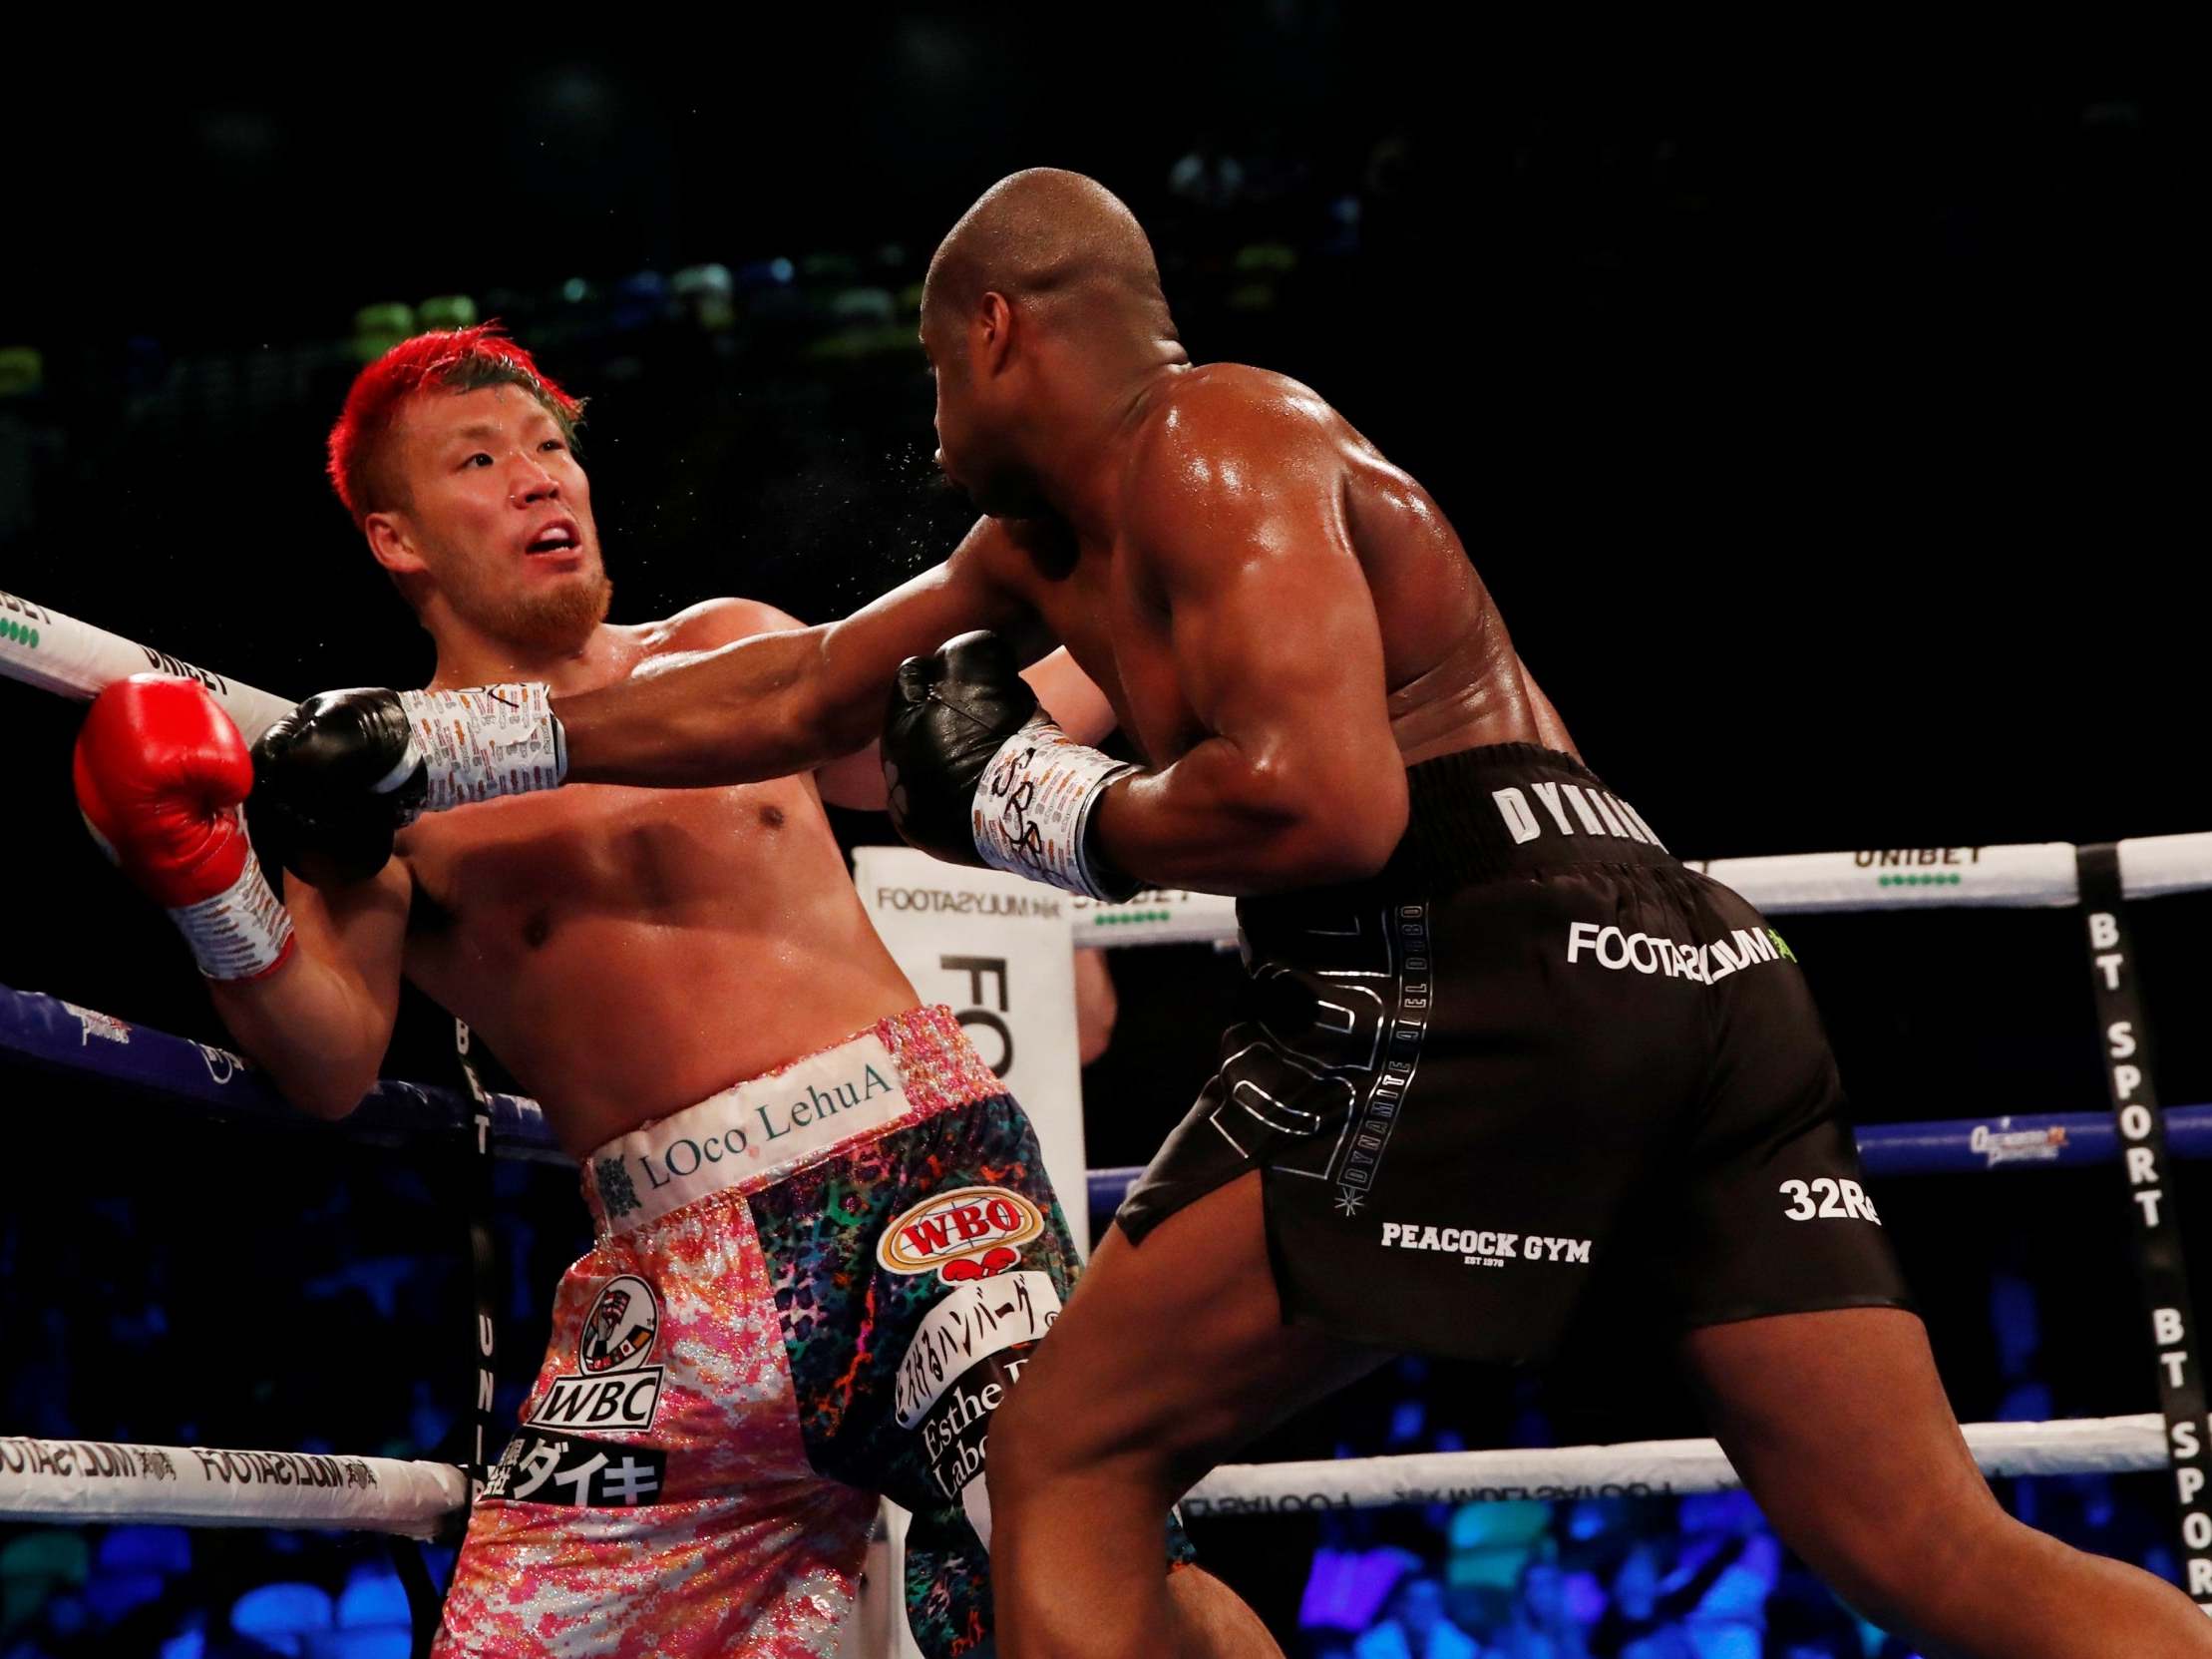 Daniel Dubois knocks out Kyotaro Fujimoto with a devastating right hand